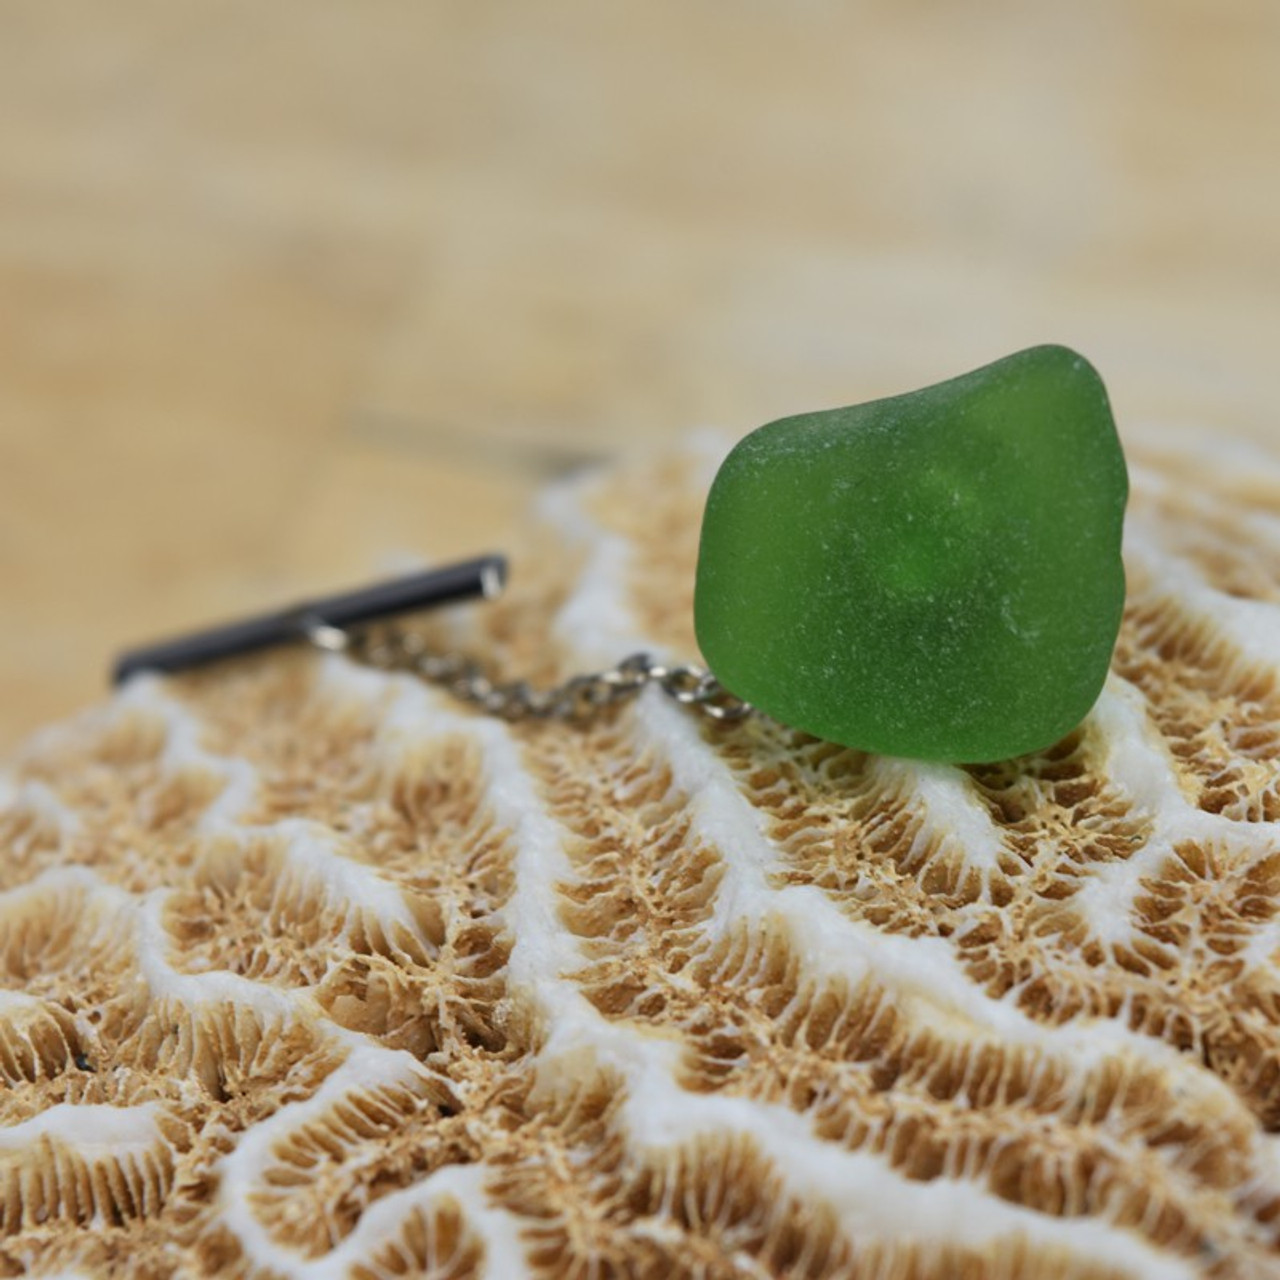 Genuine Surf Tumbled Green Sea Glass Tie Tack - Quantity of 1 - Made to Order